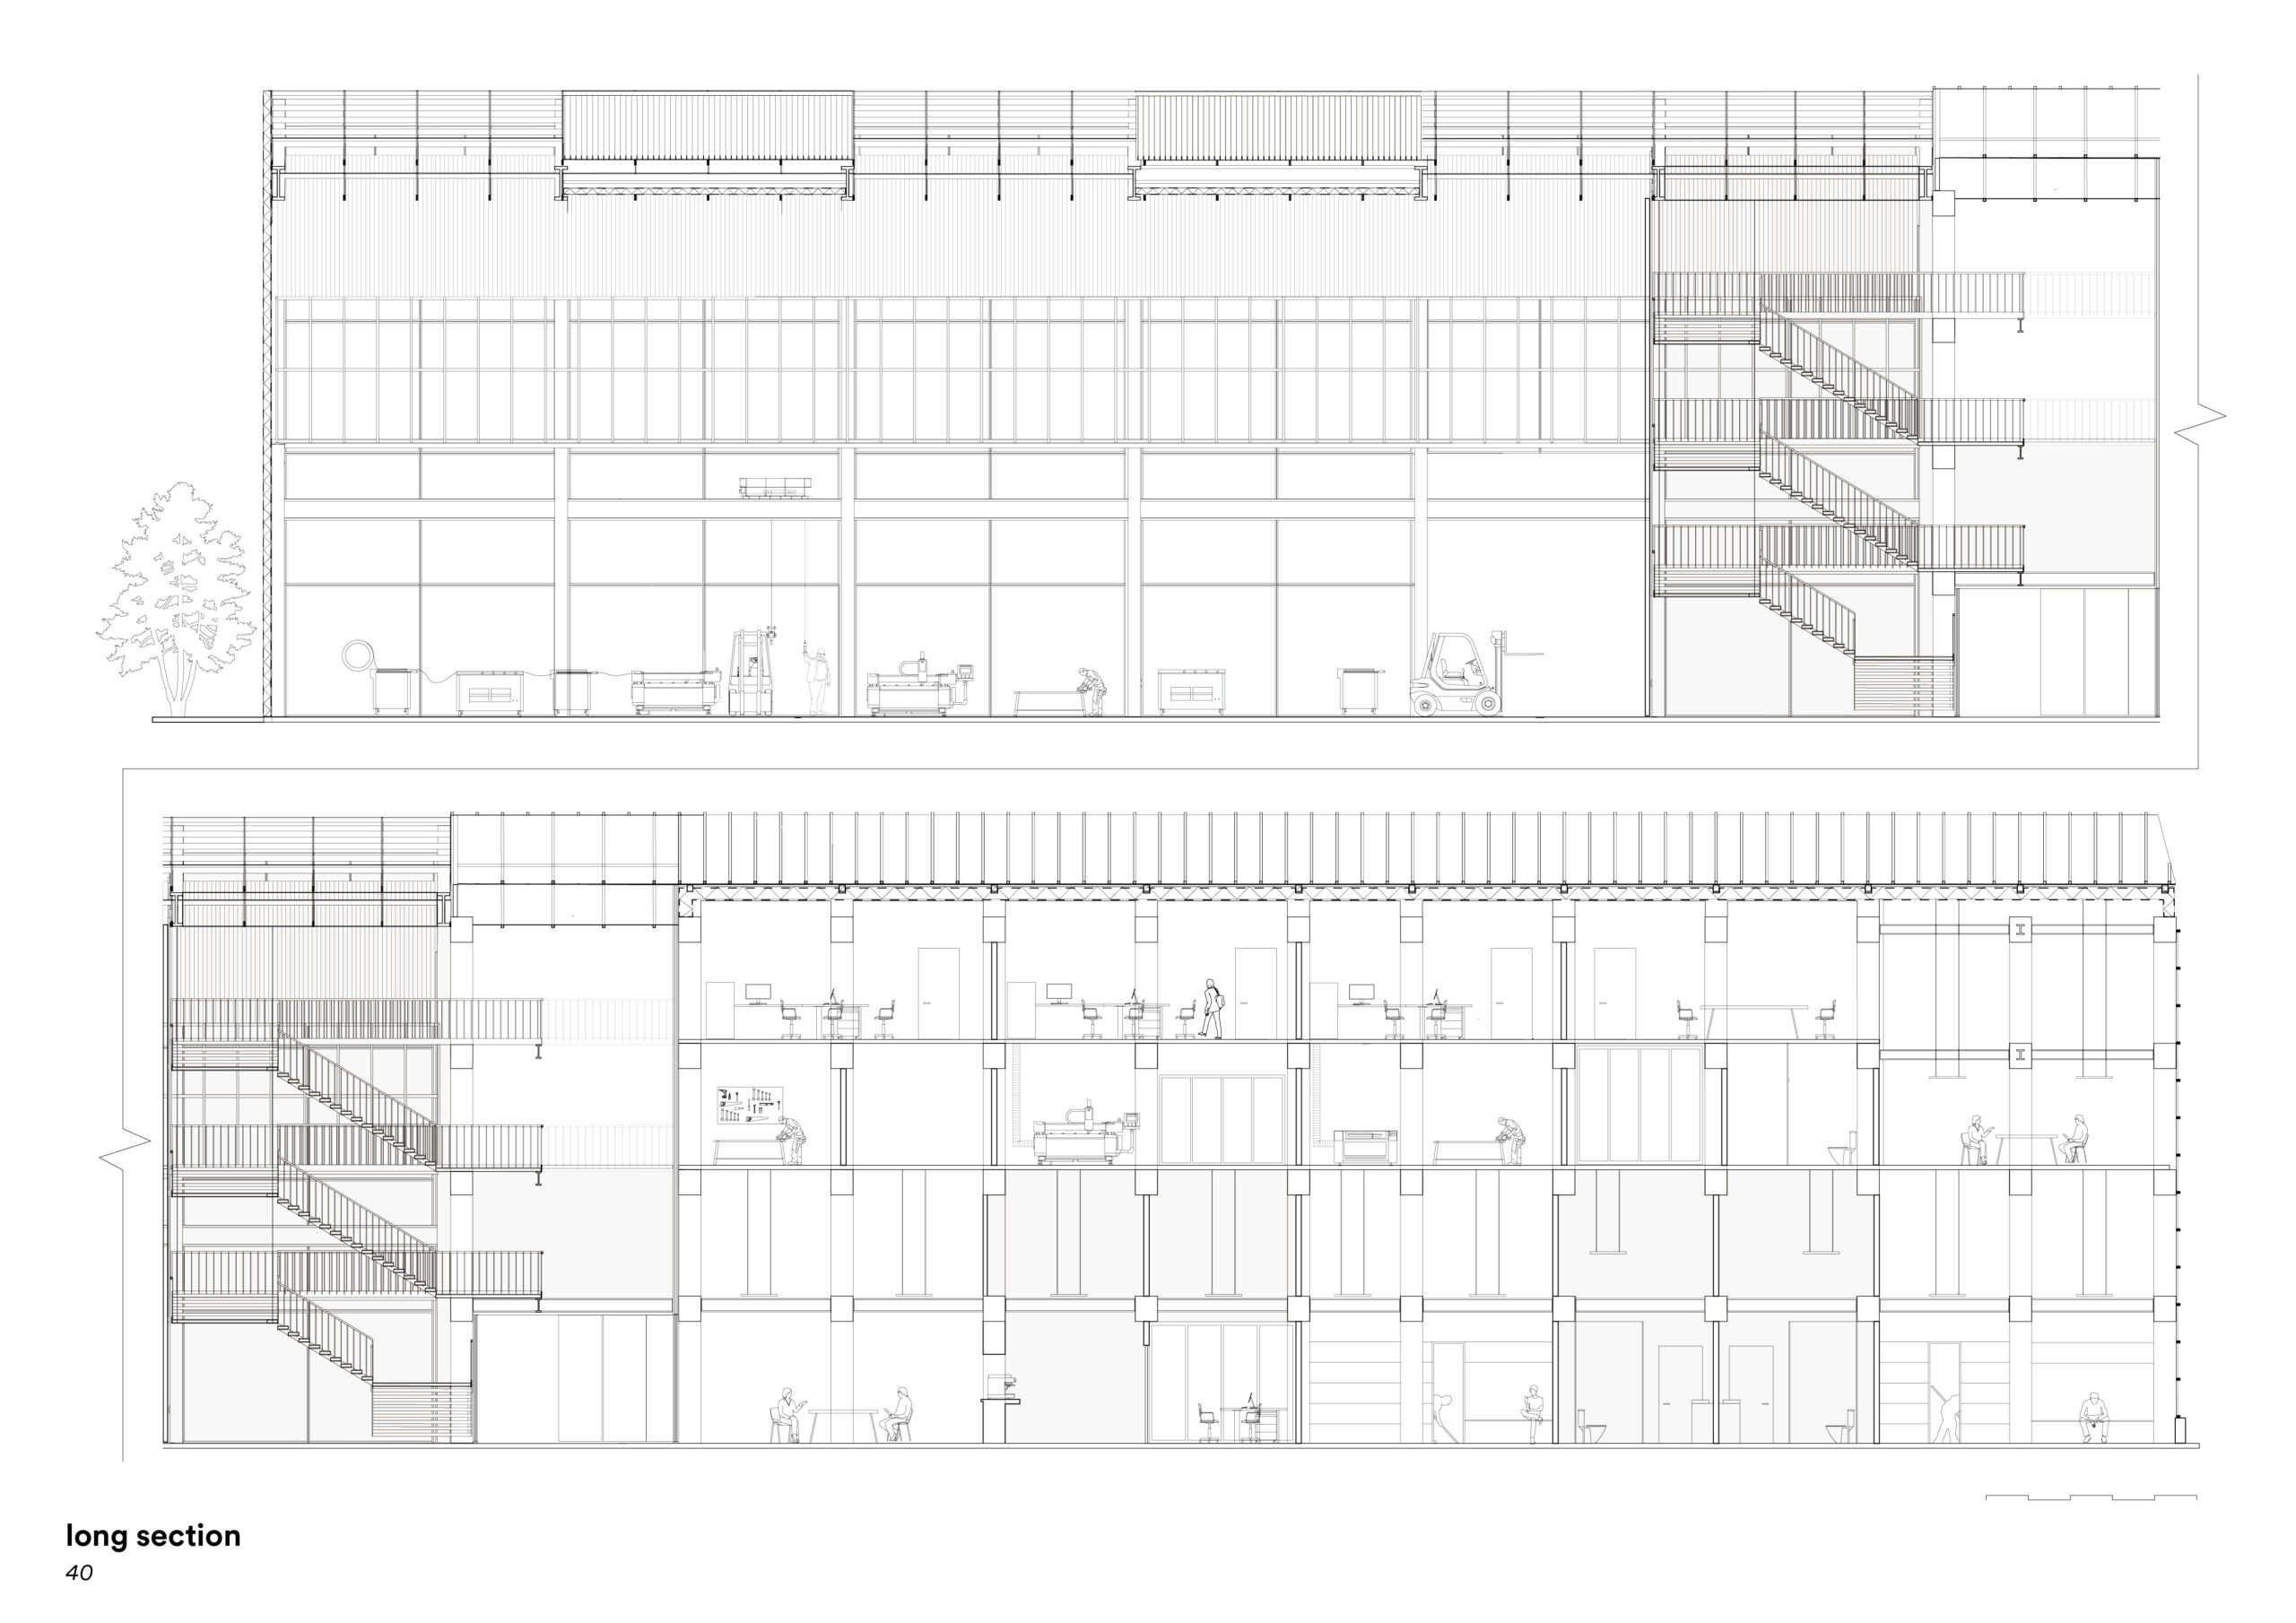 Elevational study with stairs to the right. Sectional study with stairs to the left  and activity on all 4 floors